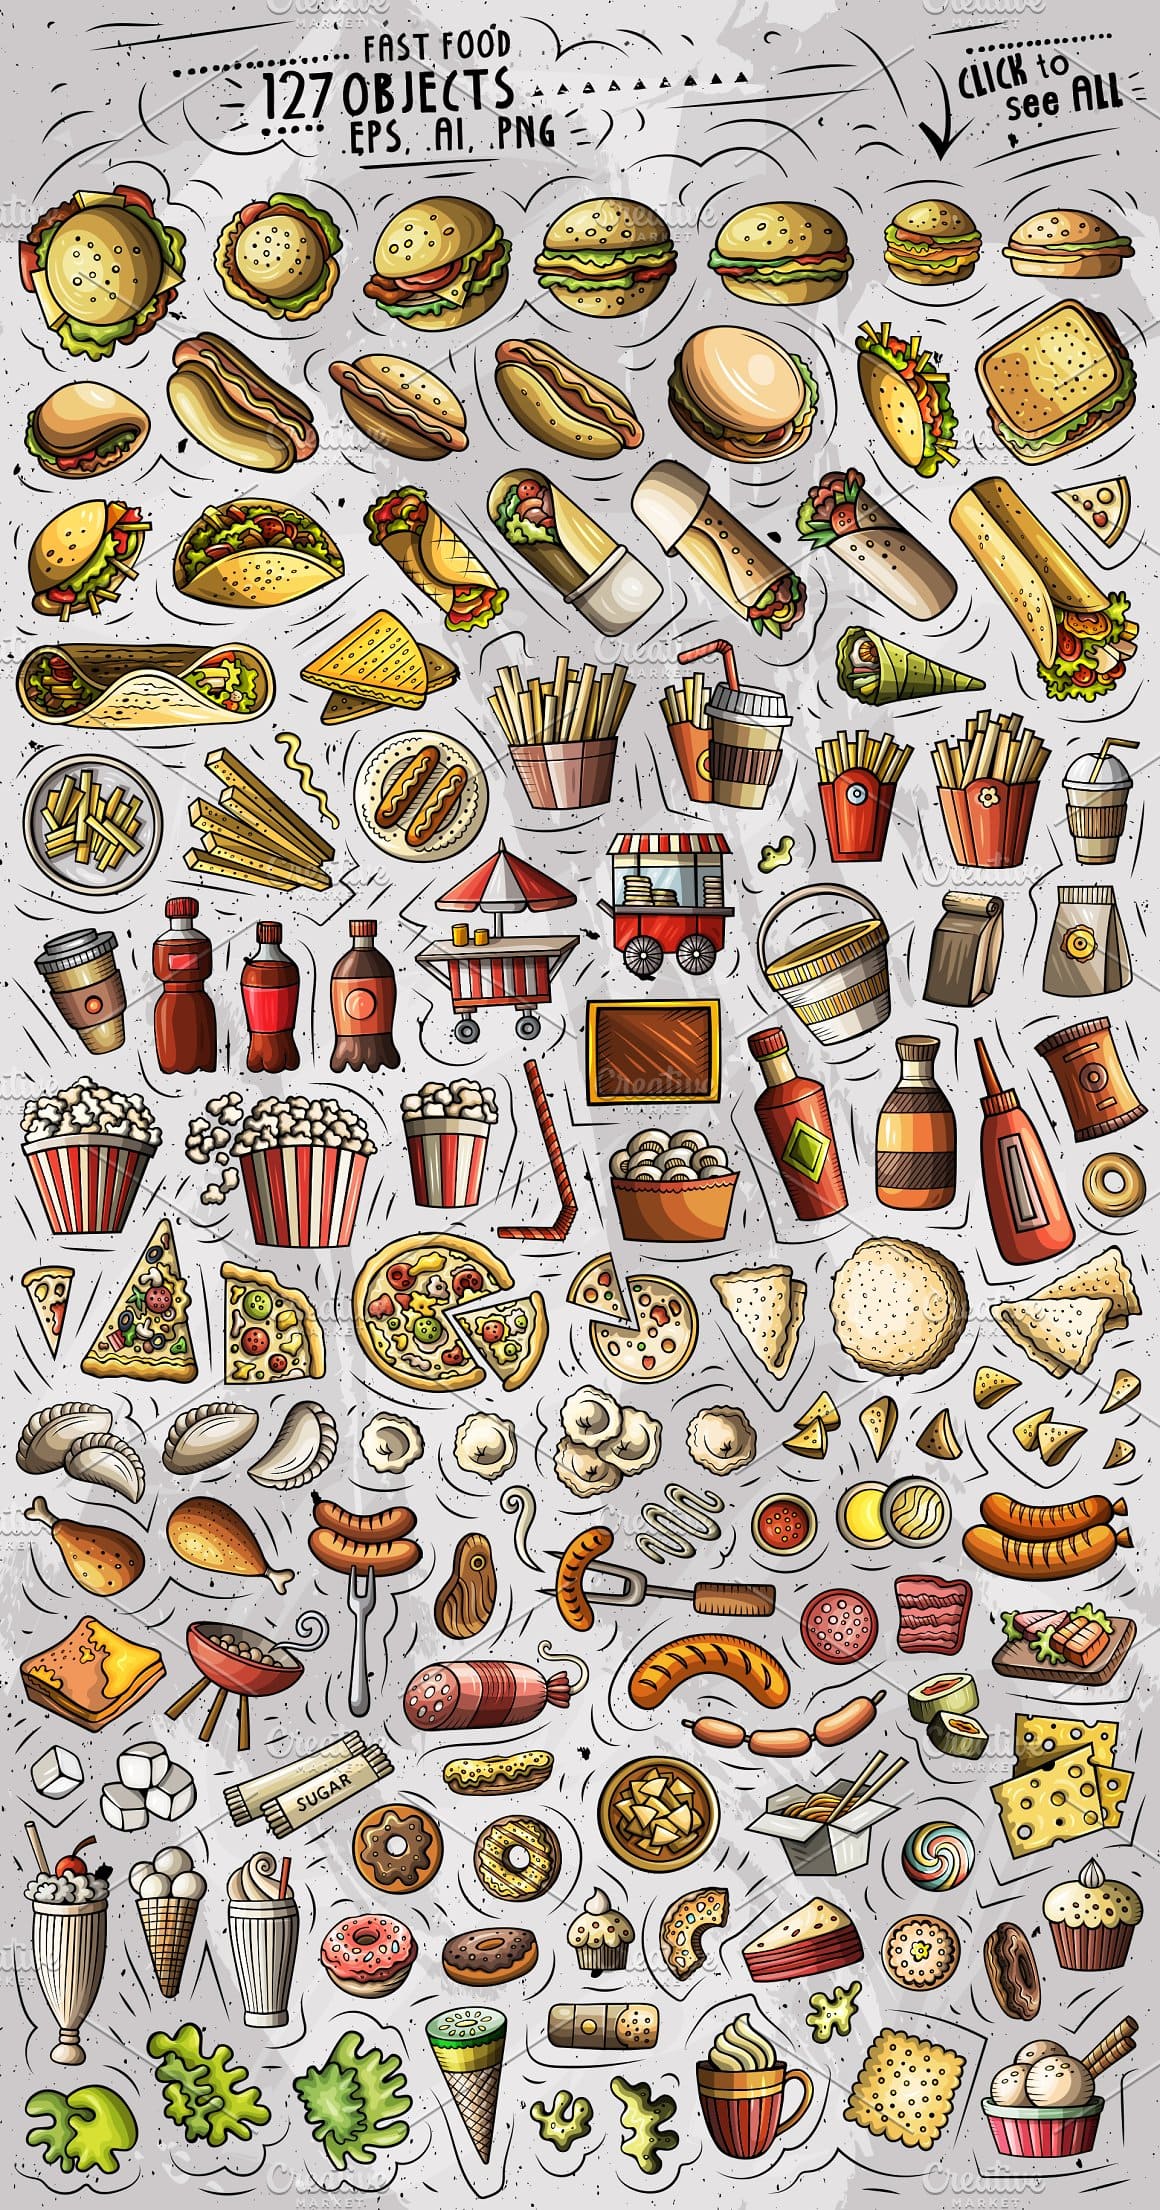 Fast Food Cartoon Objects Set Preview 2.